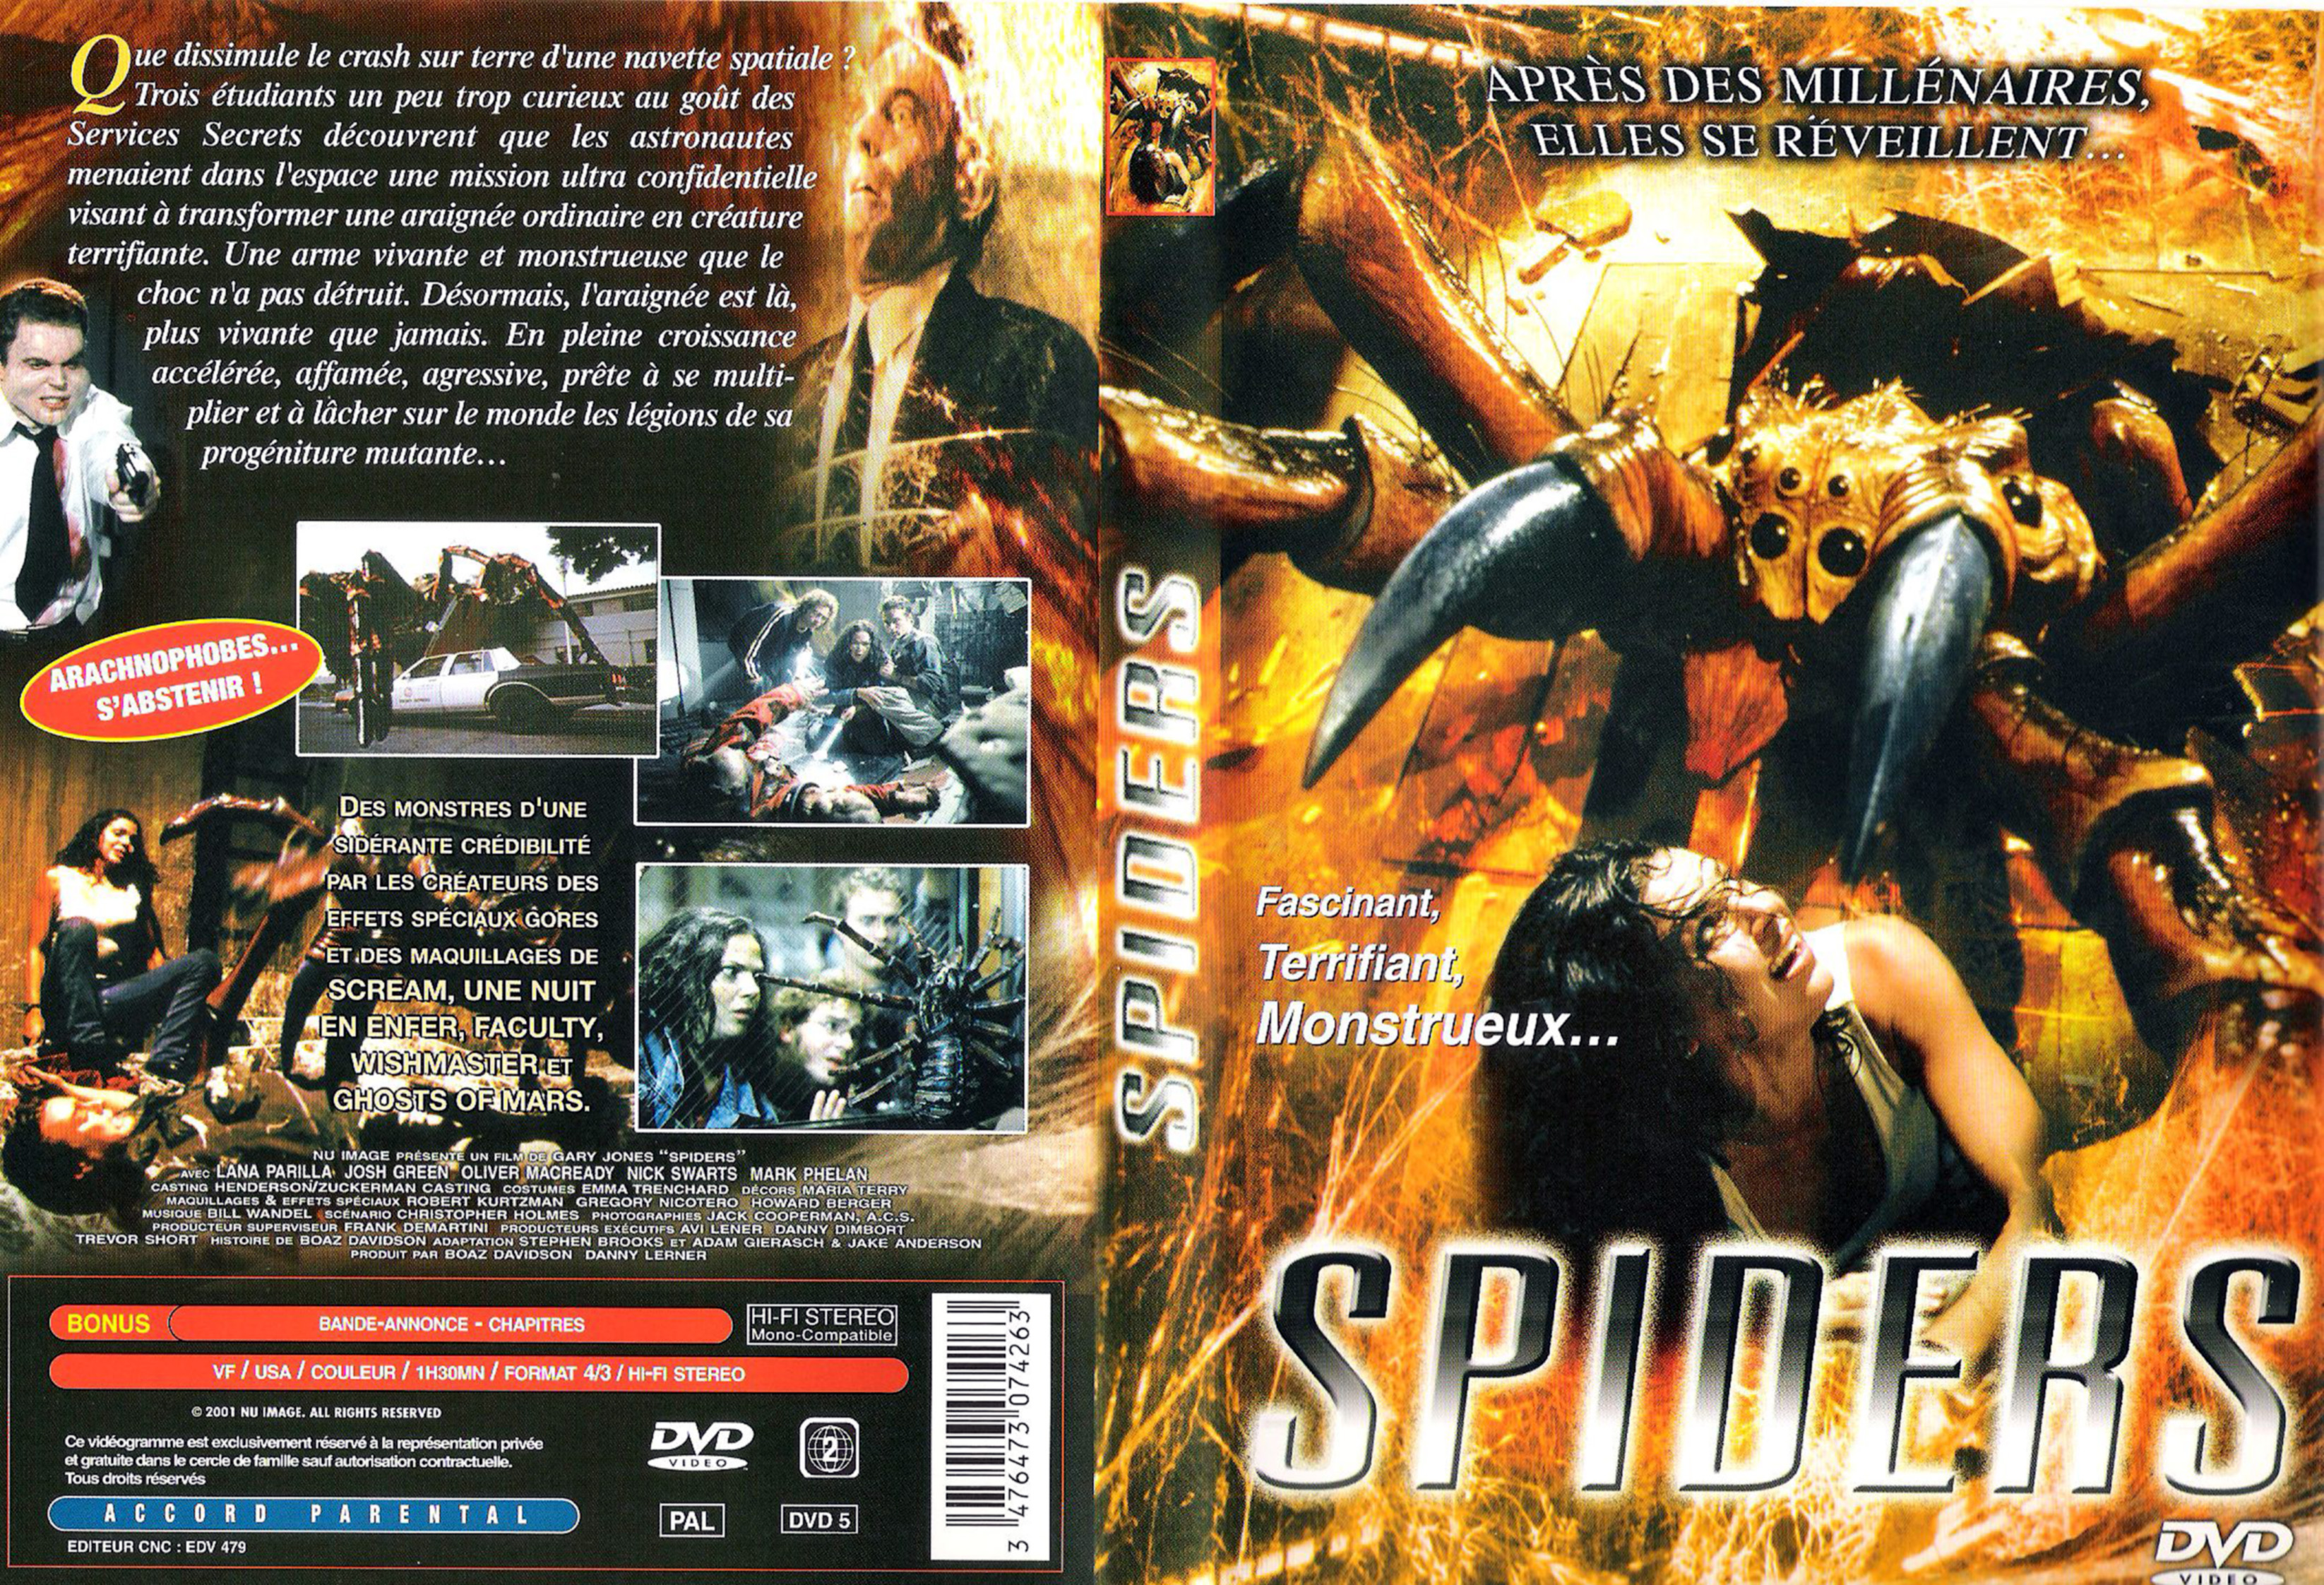 Jaquette DVD Spiders